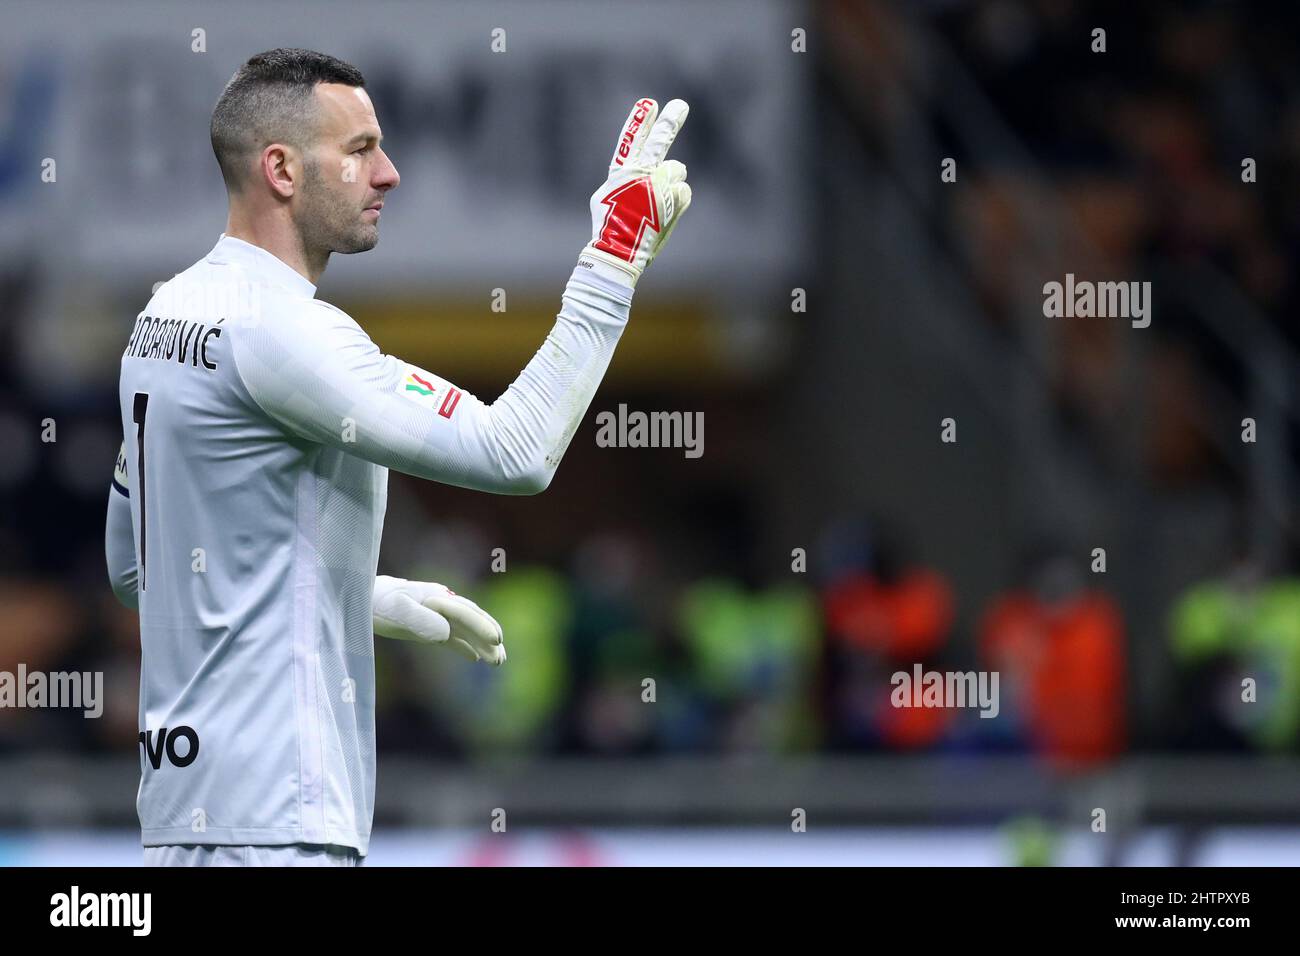 Milan, Italy. March 1, 2022, Samir Handanovic of Fc Internazionale  gestures during the Coppa Italia Semi Final 1st Leg match between AC Milan and FC Internazionale at Stadio Giuseppe Meazza on March 1, 2022 in Milan, Italy. Credit: Marco Canoniero/Alamy Live News Stock Photo